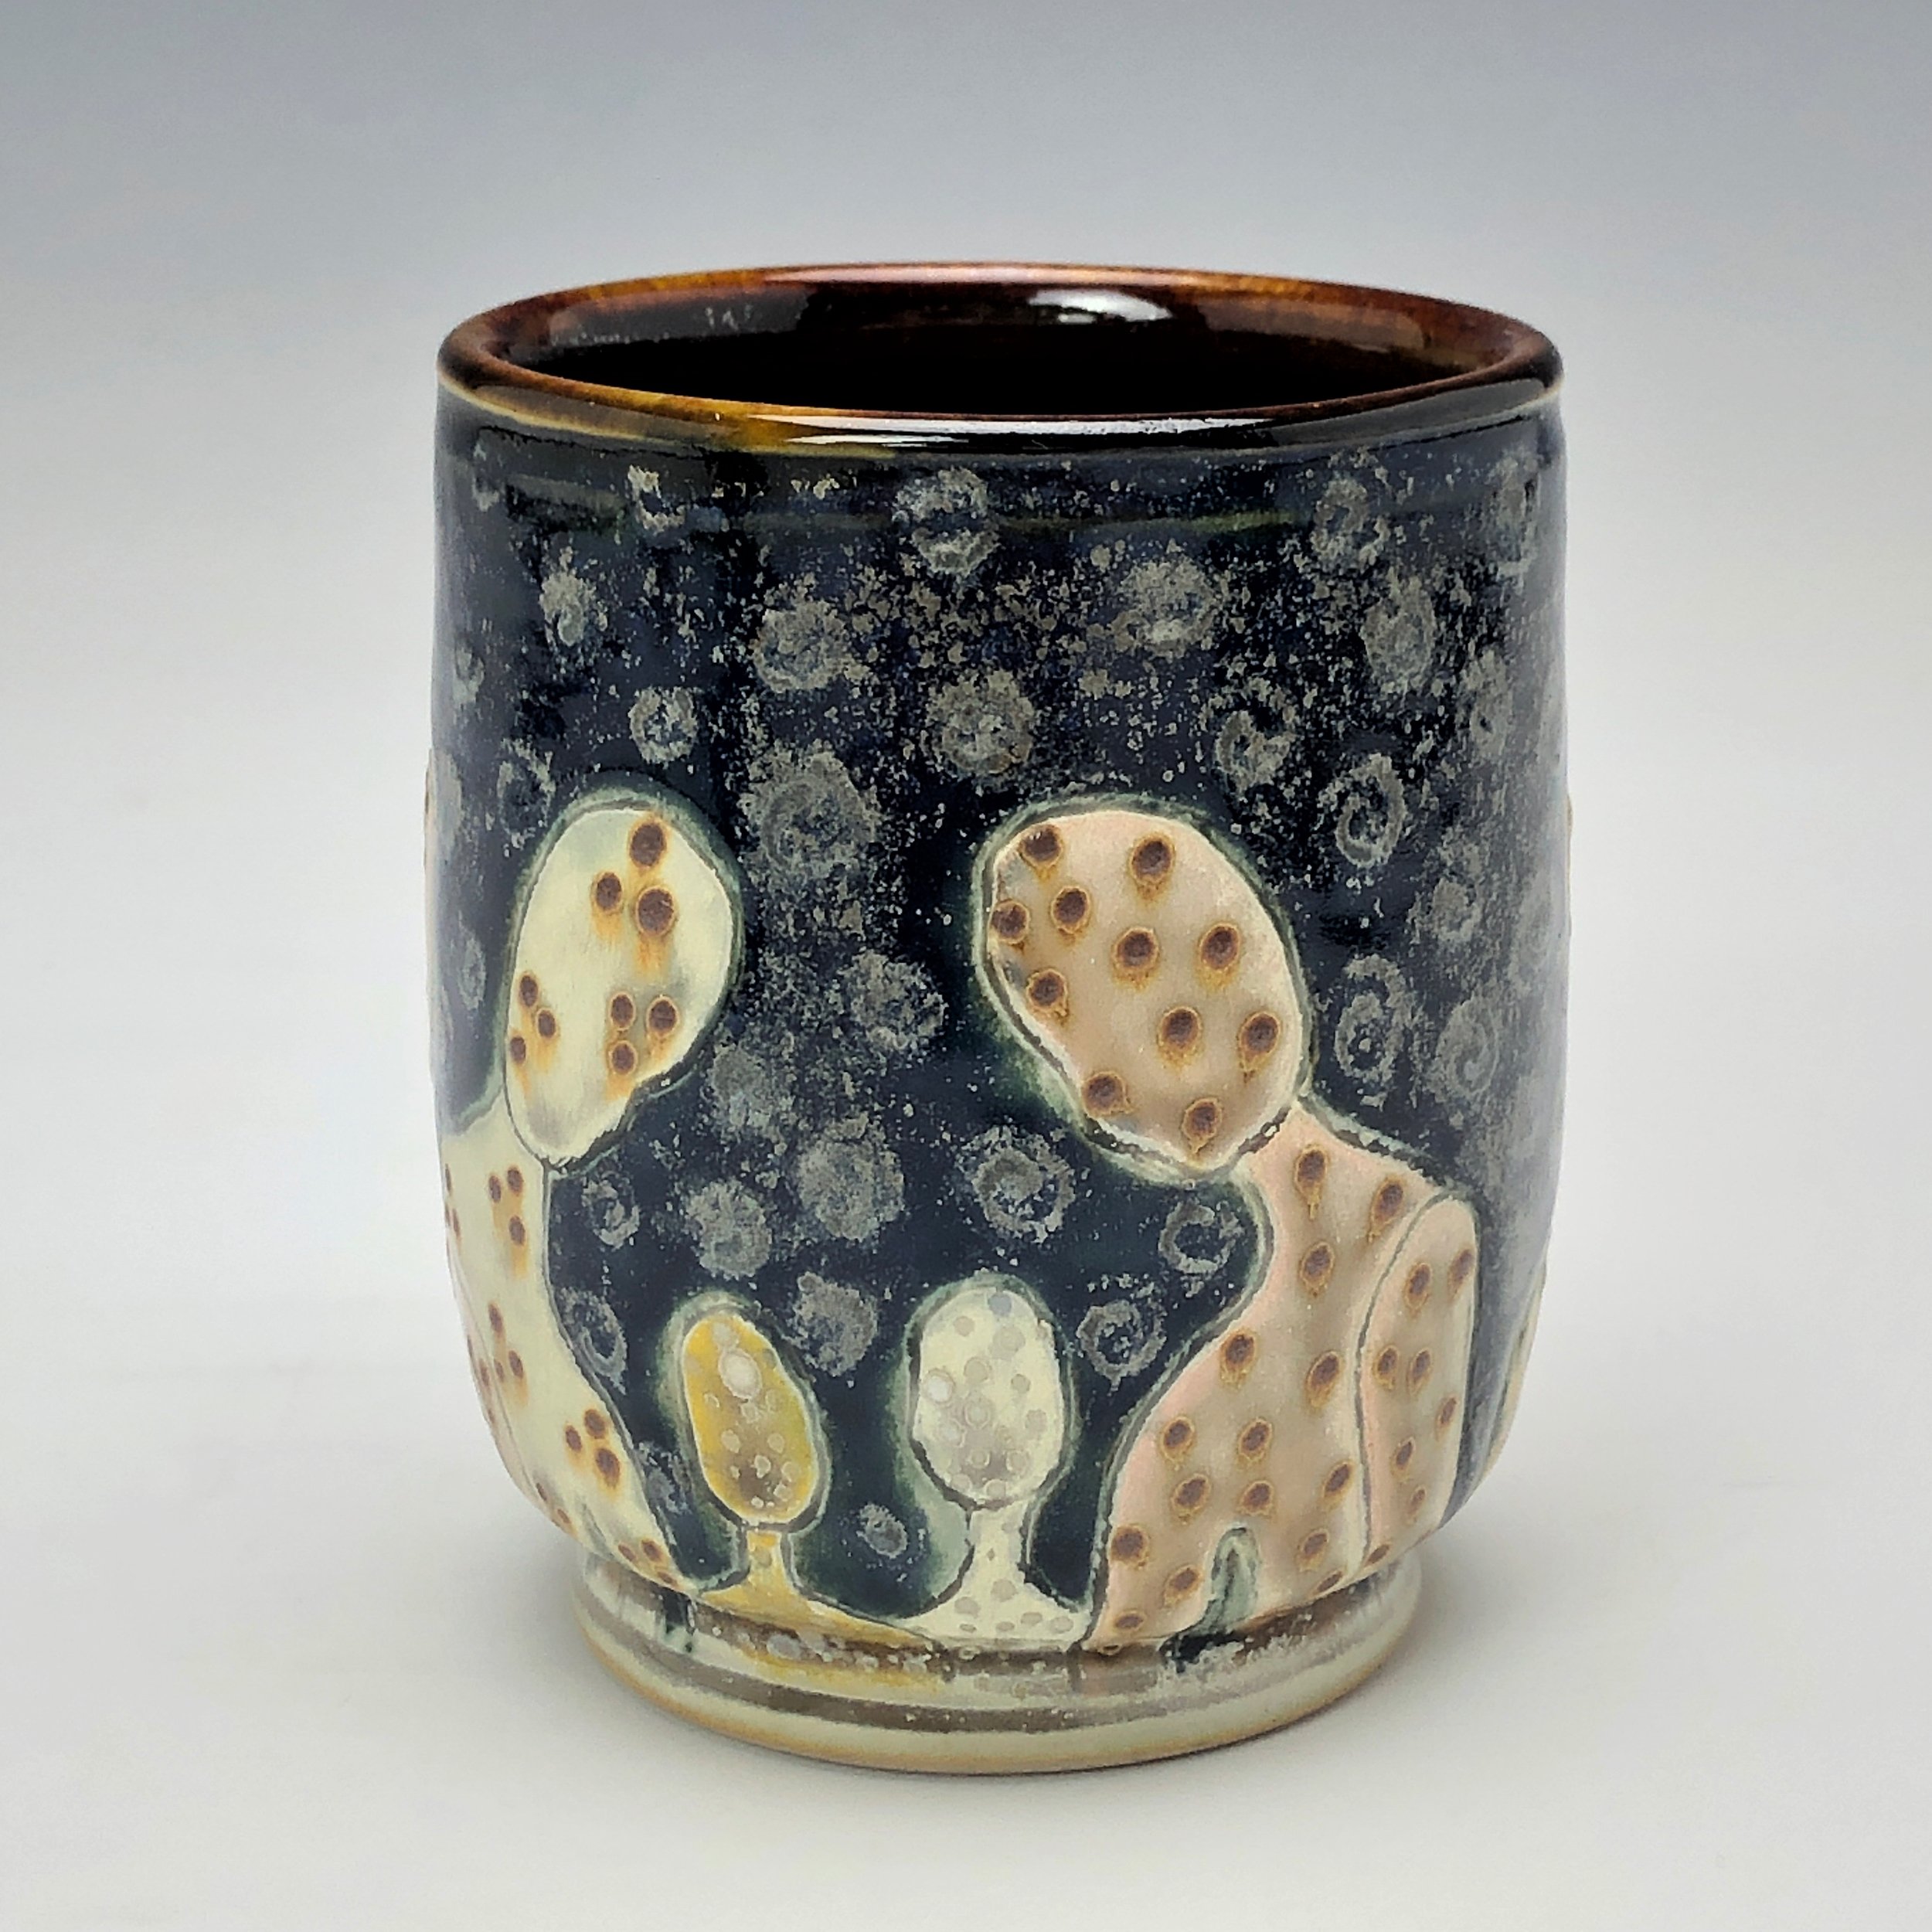  Samantha Henneke, Bulldog Pottery, Seagrove, North Carolina  Yunomi 4- Casual drinking cup made from a smooth white porcelaneous clay body. Figurative decoration with slip and glaze dot patterns. Translucent vellum glaze over various underglaze colo